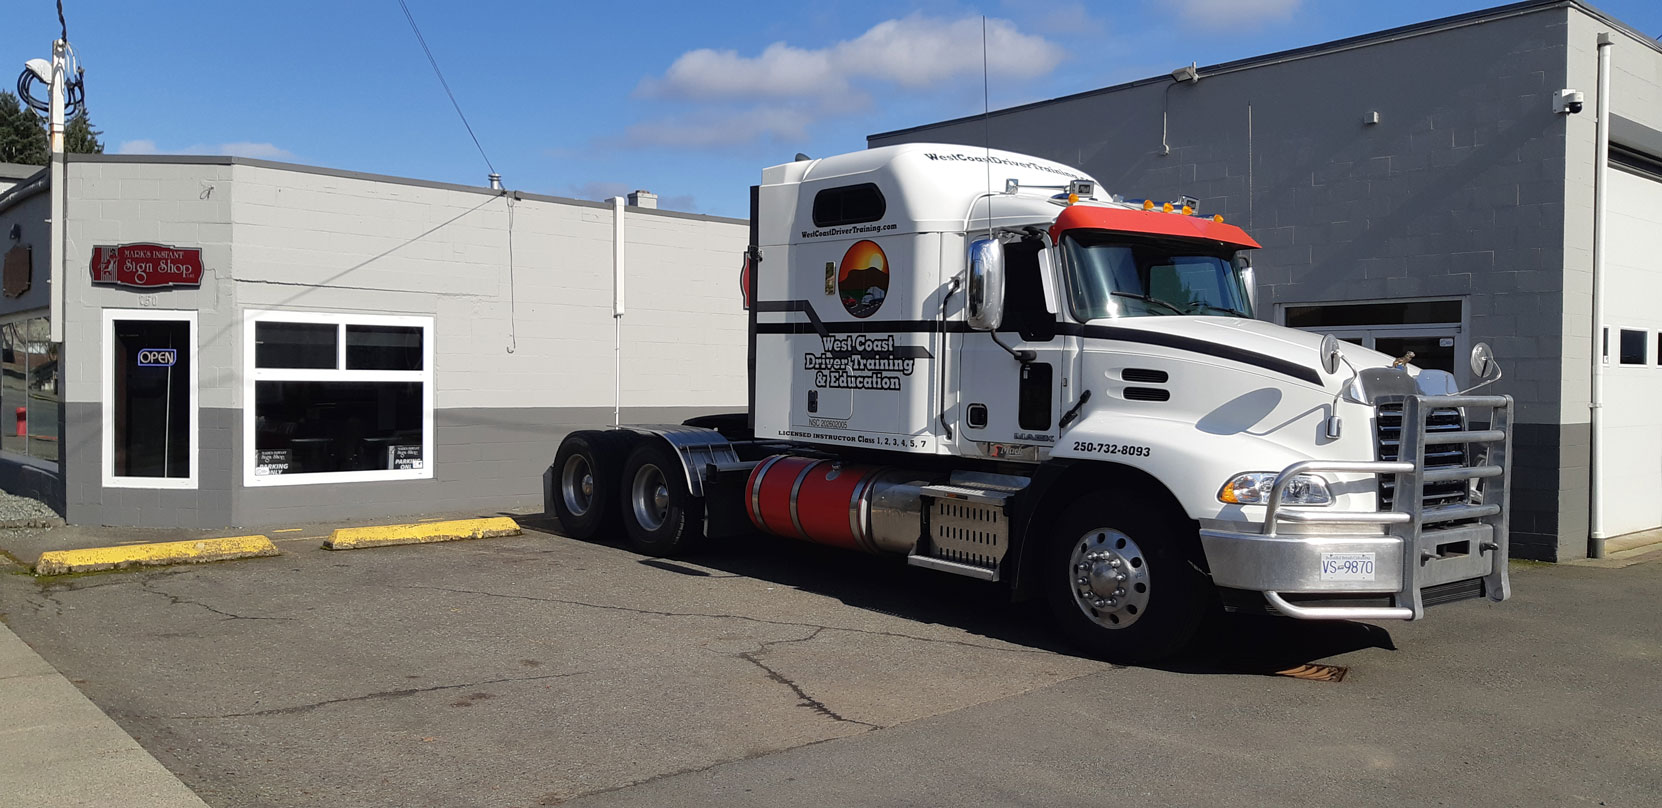 Our 2016 Mack Pinnacle at Mark's Instant Sign Shop after having our corporate decals applied, February 2024 [photo: West Coast Driver Training]